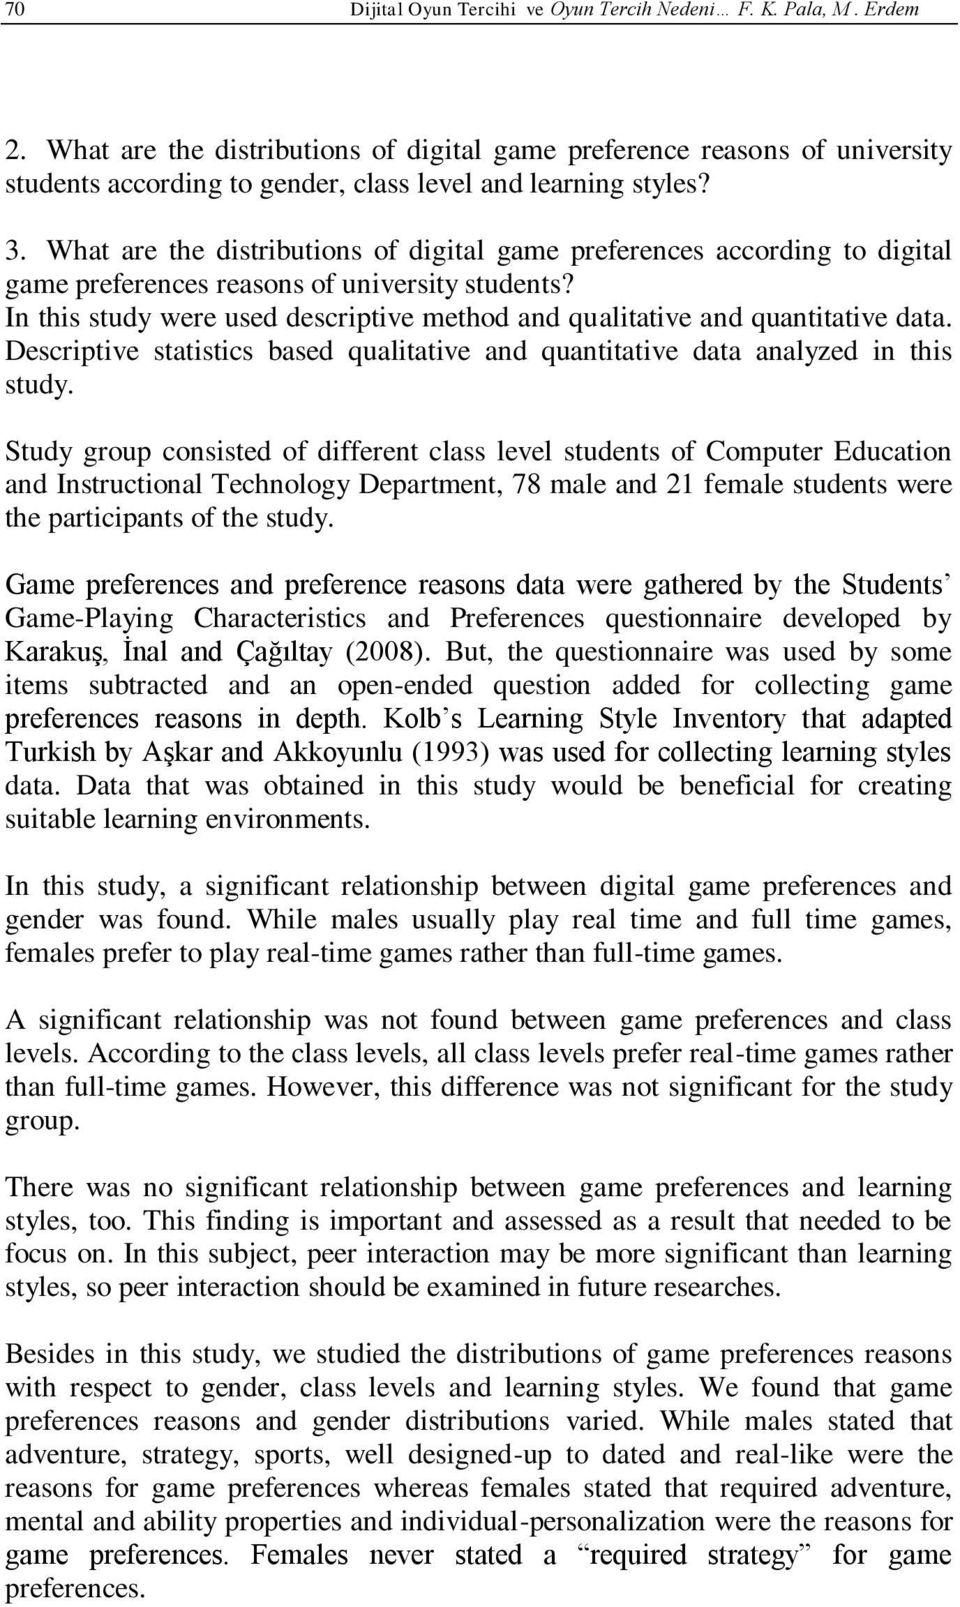 What are the distributions of digital game preferences according to digital game preferences reasons of university students?